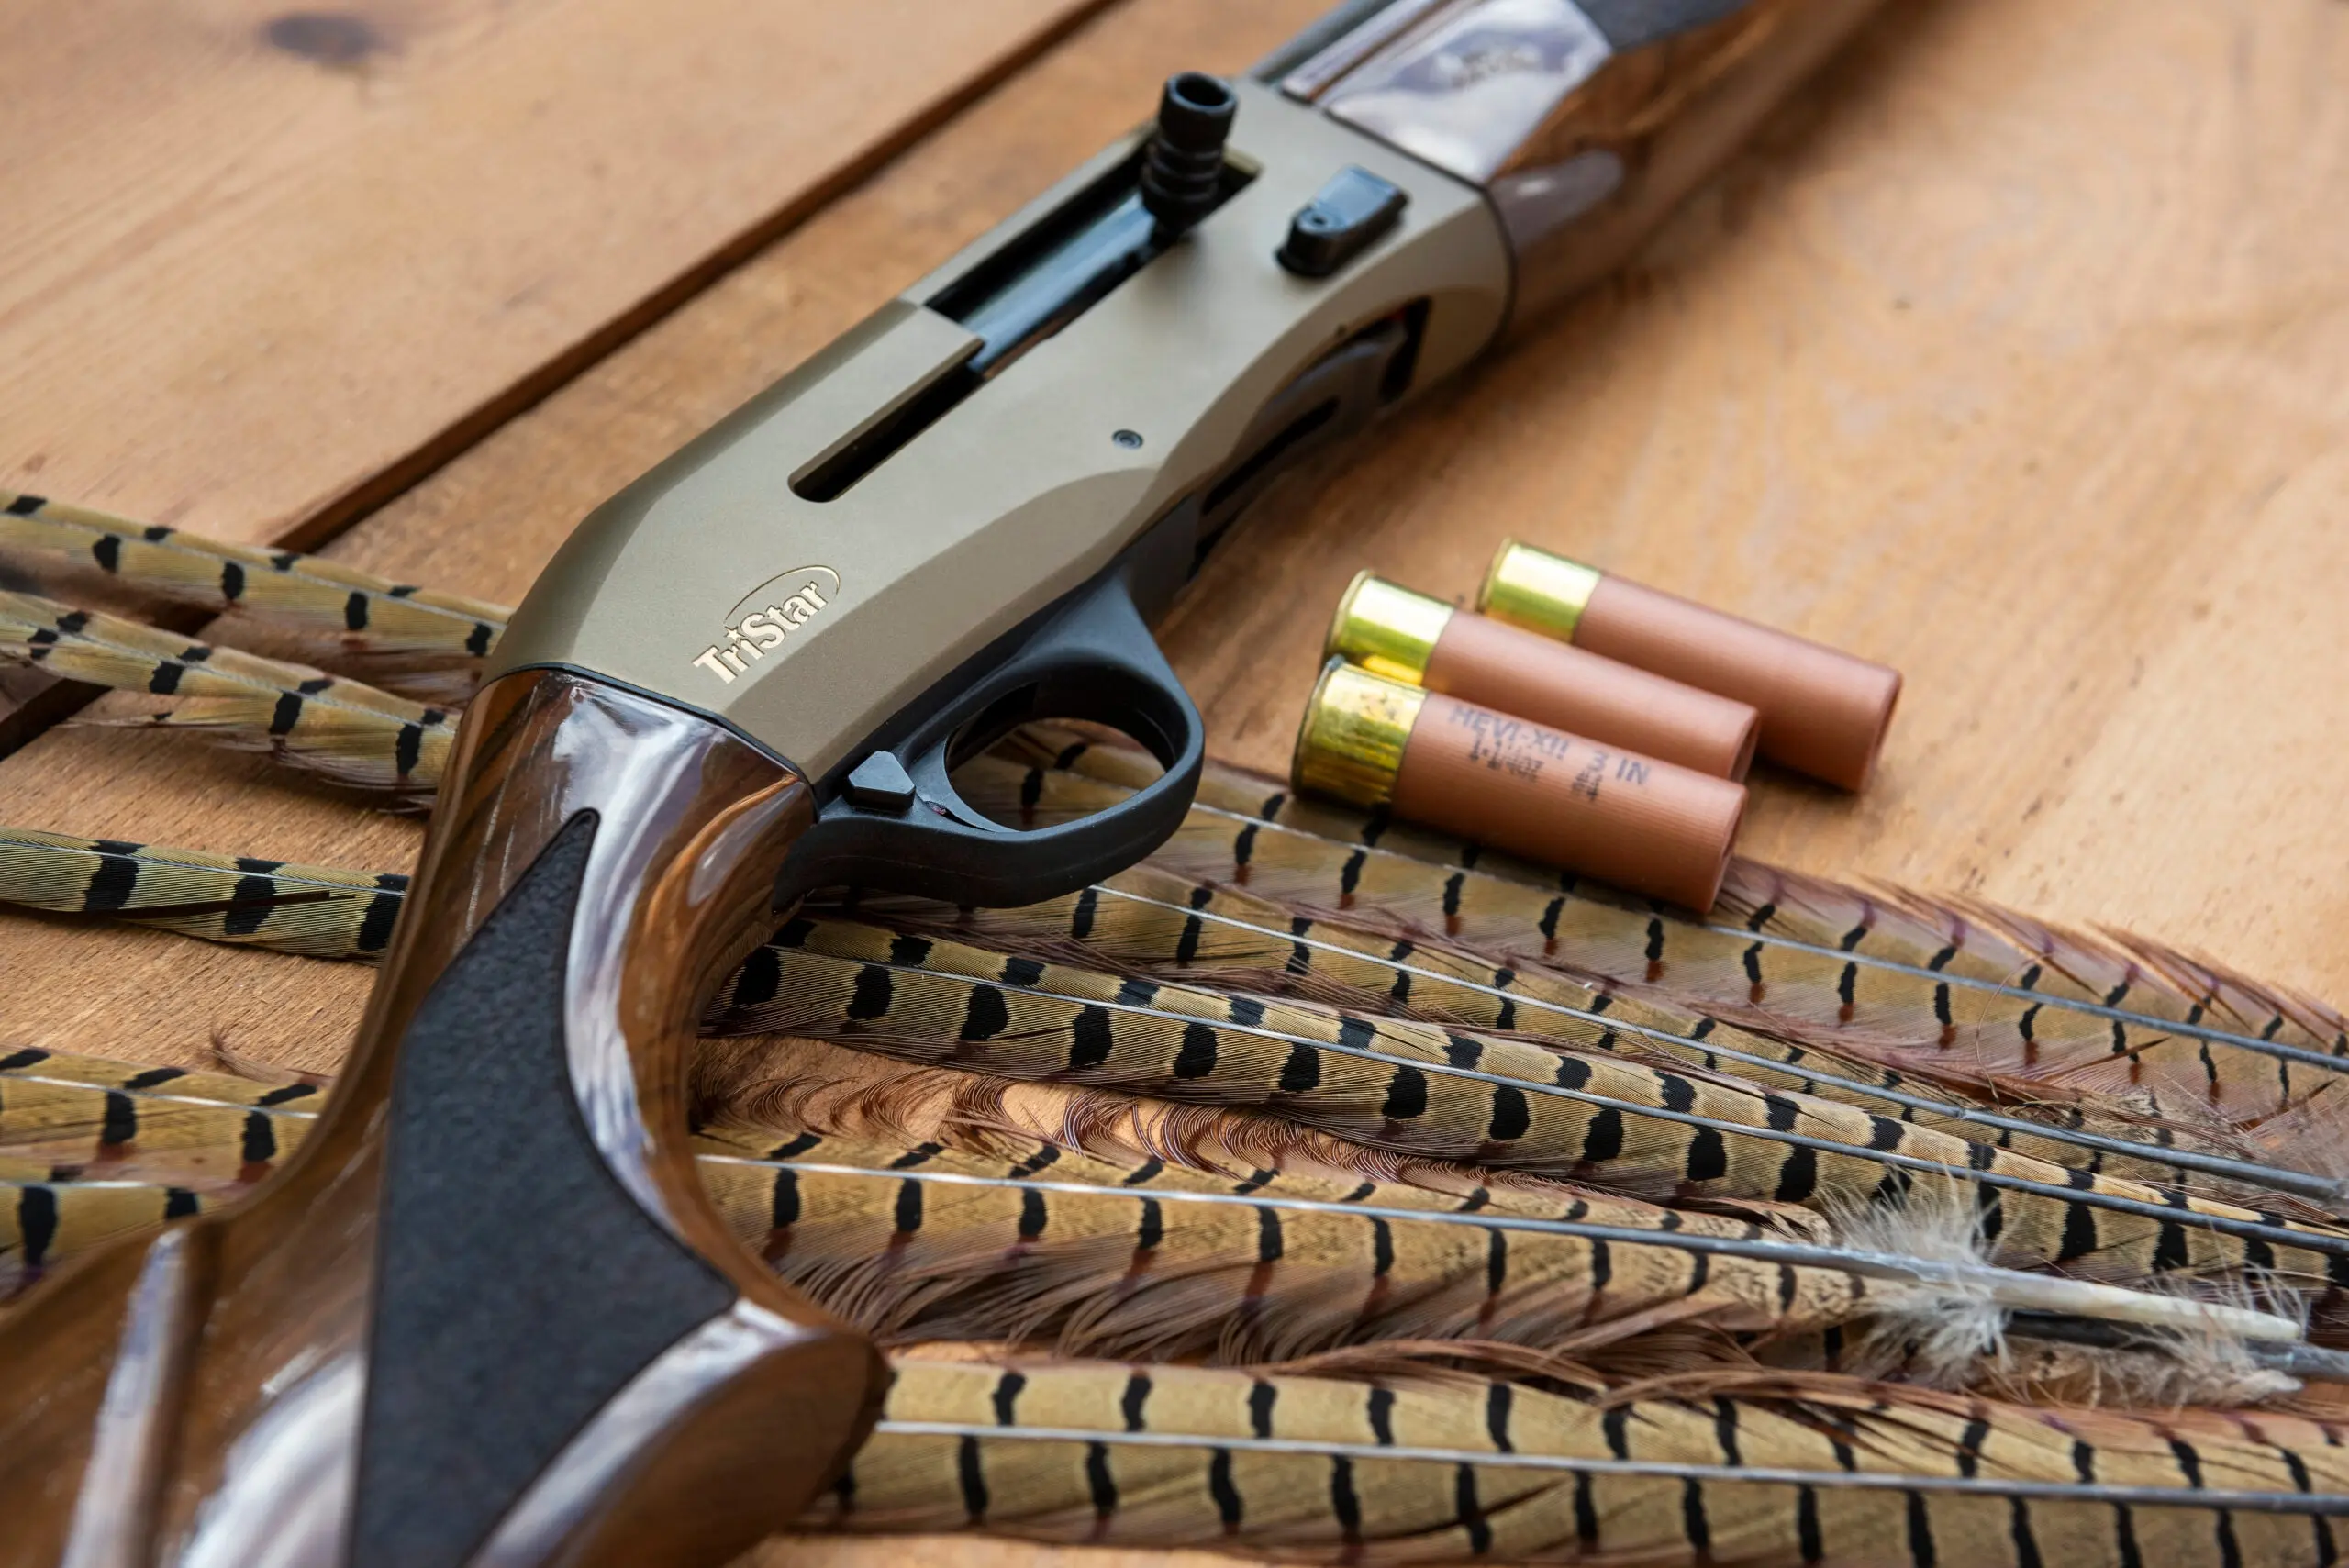 Close-up of Tristar Viper G2 Pro shotgun lying on a table with shotgun shells and pheasant tail feathers.